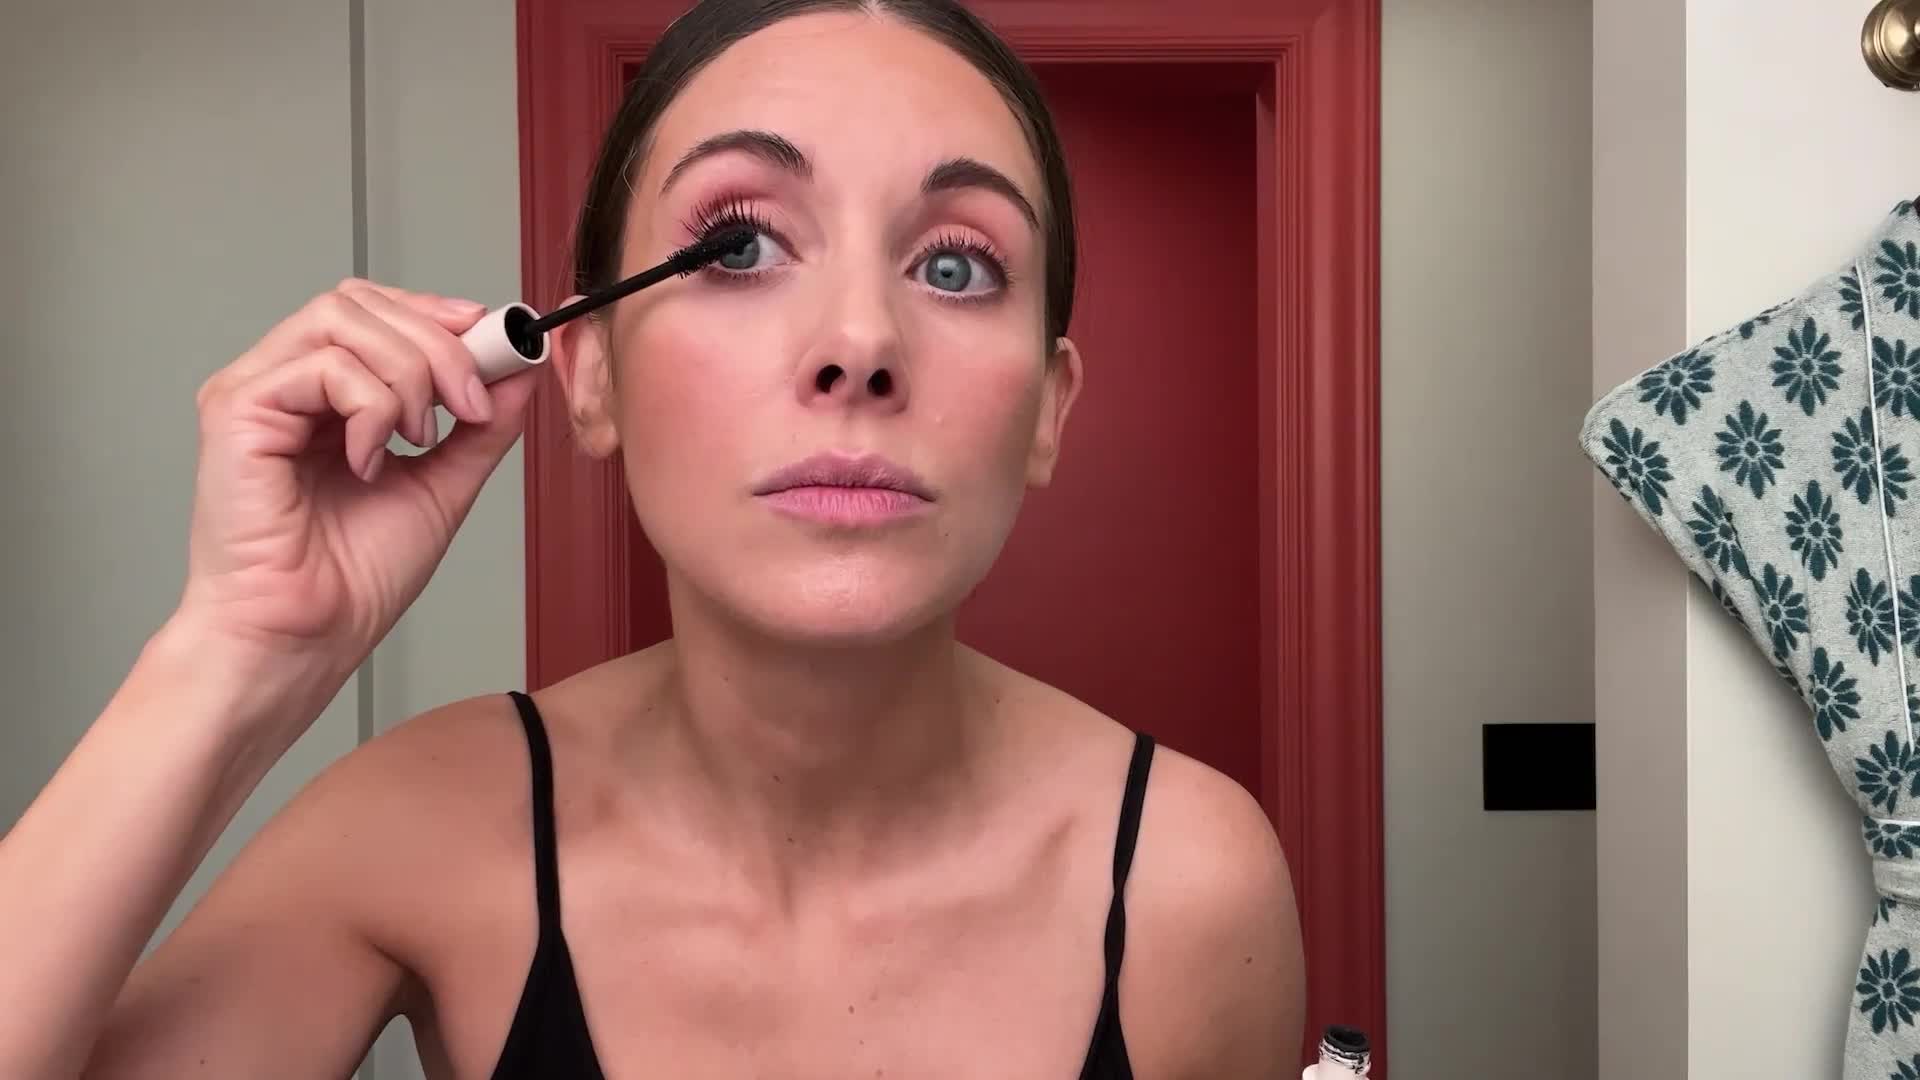 Alison Tyler Sleeping Sex Video - Watch Alison Brie's Guide to Post-Workout Skin Care and Date Night Makeup |  Beauty Secrets | Vogue